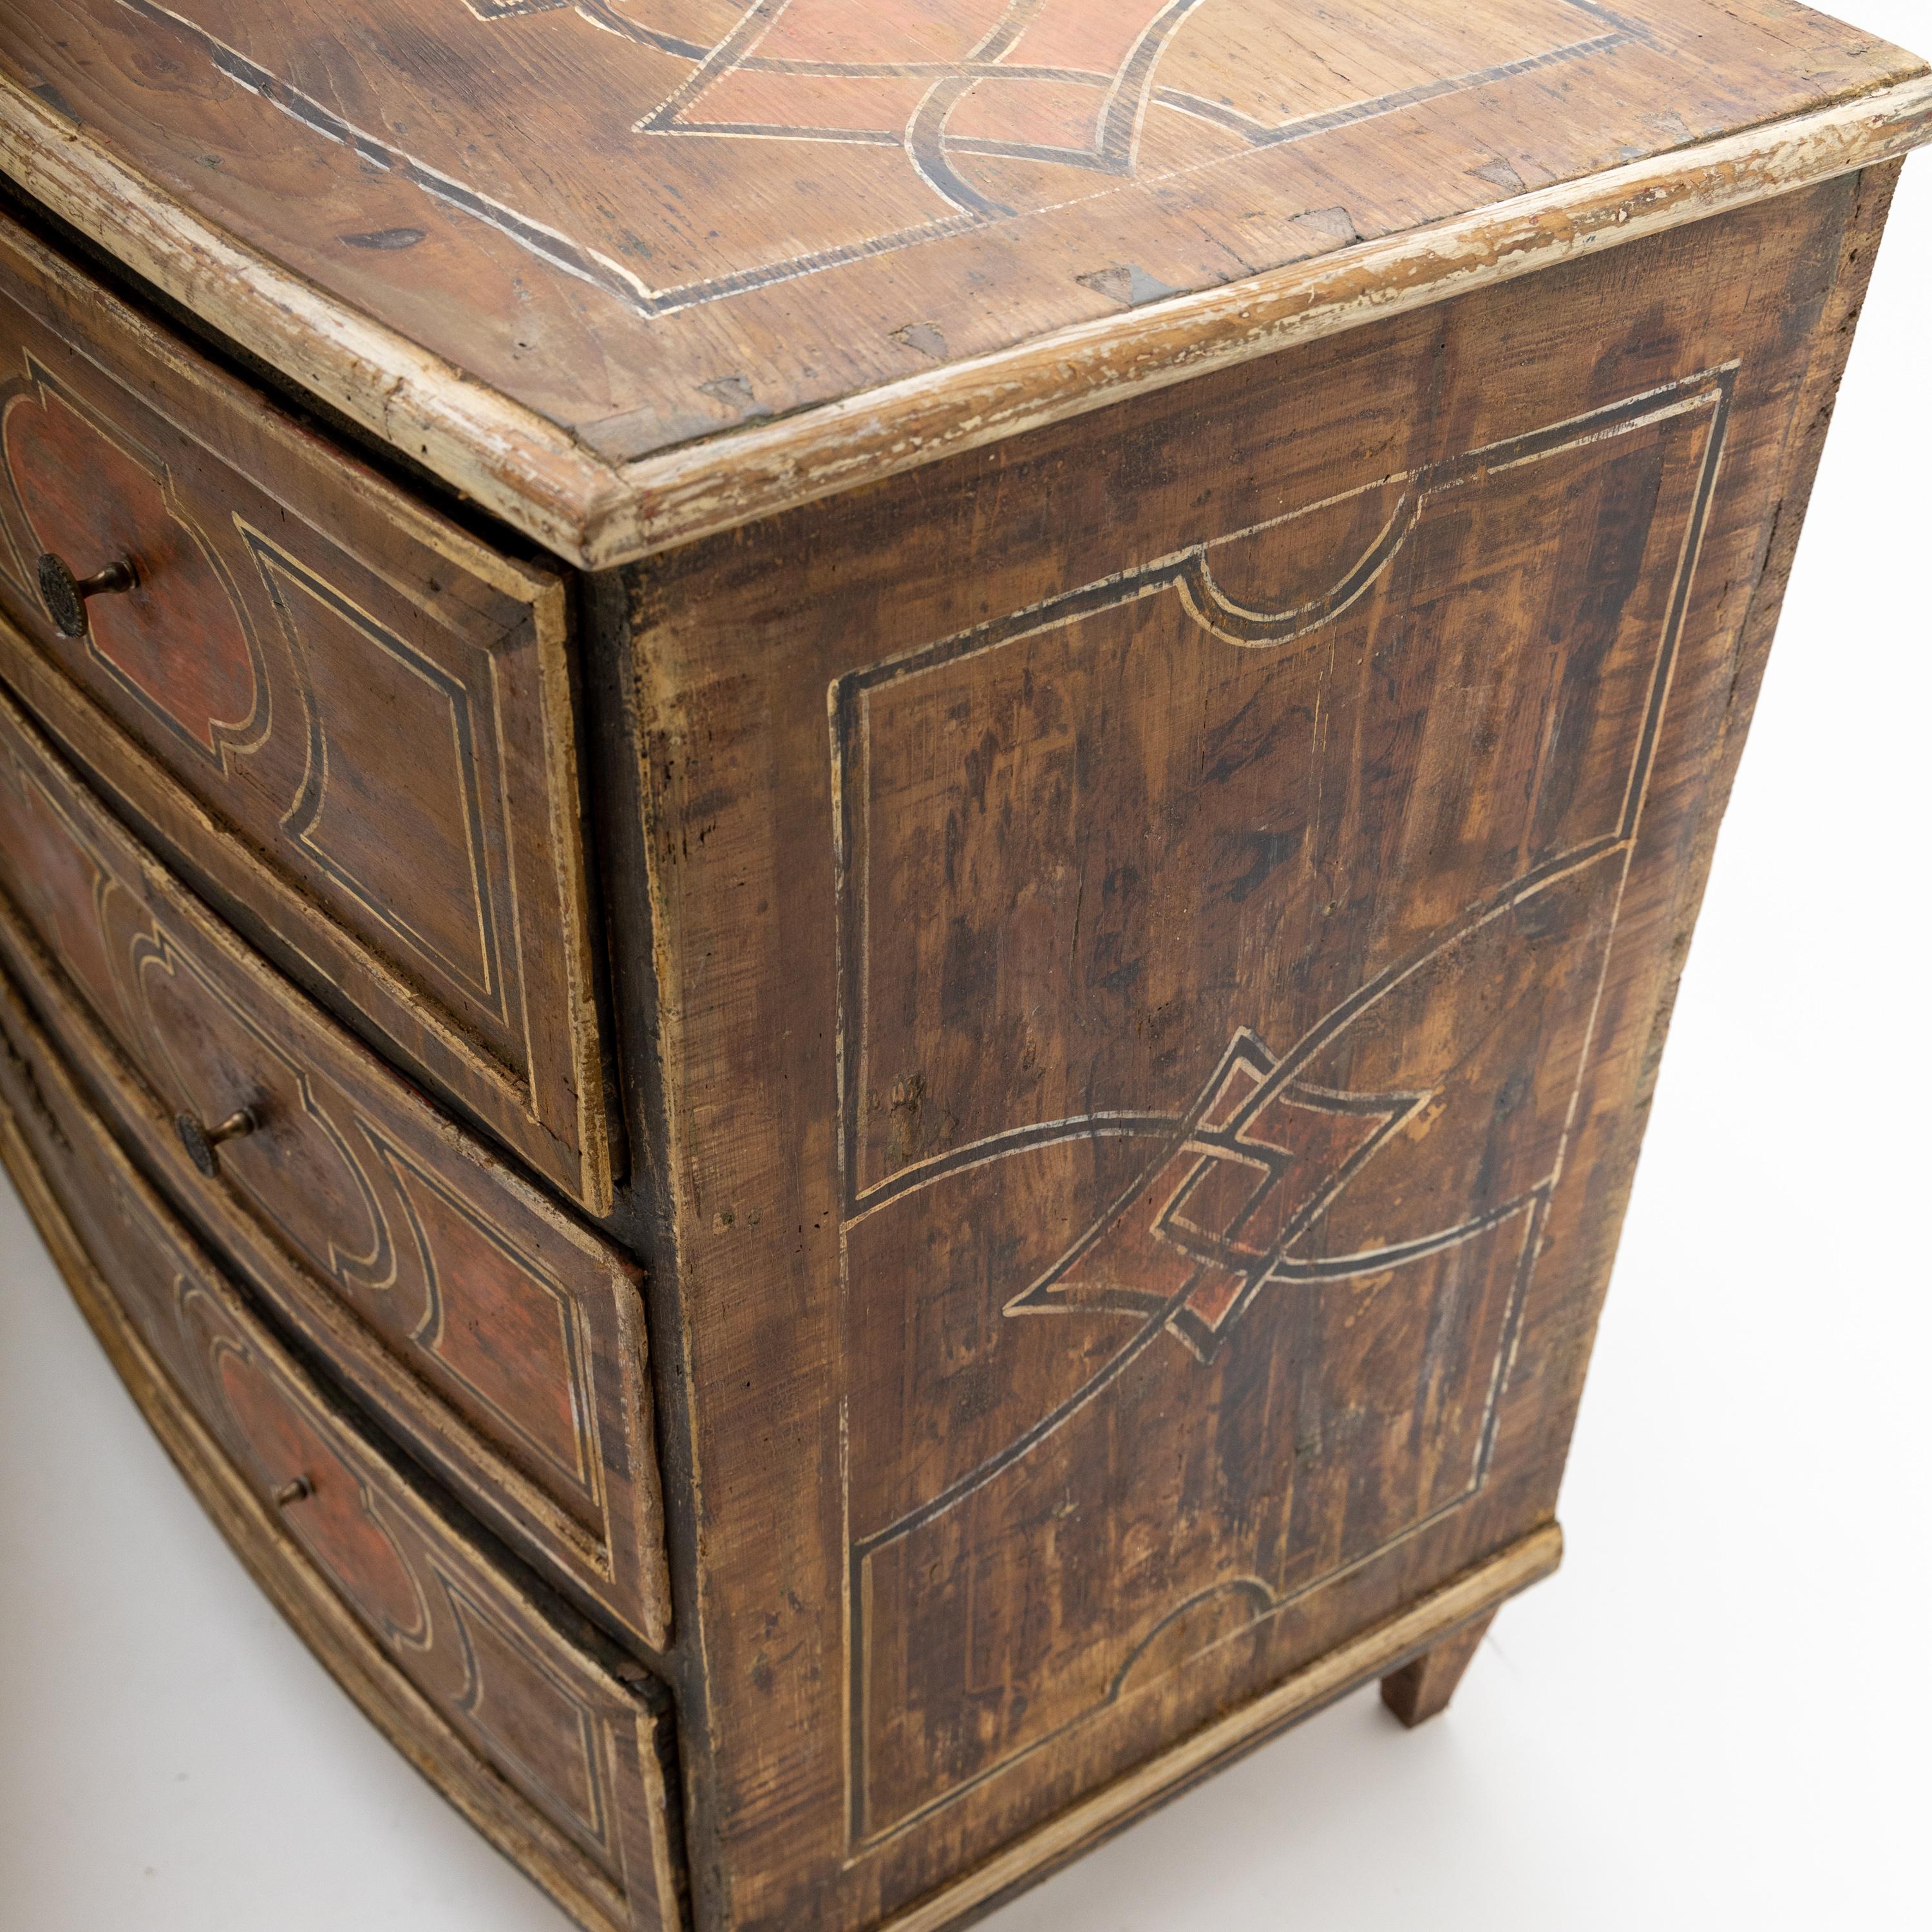 Late 18th Century Baroque Chest of Drawers, South Germany around 1780